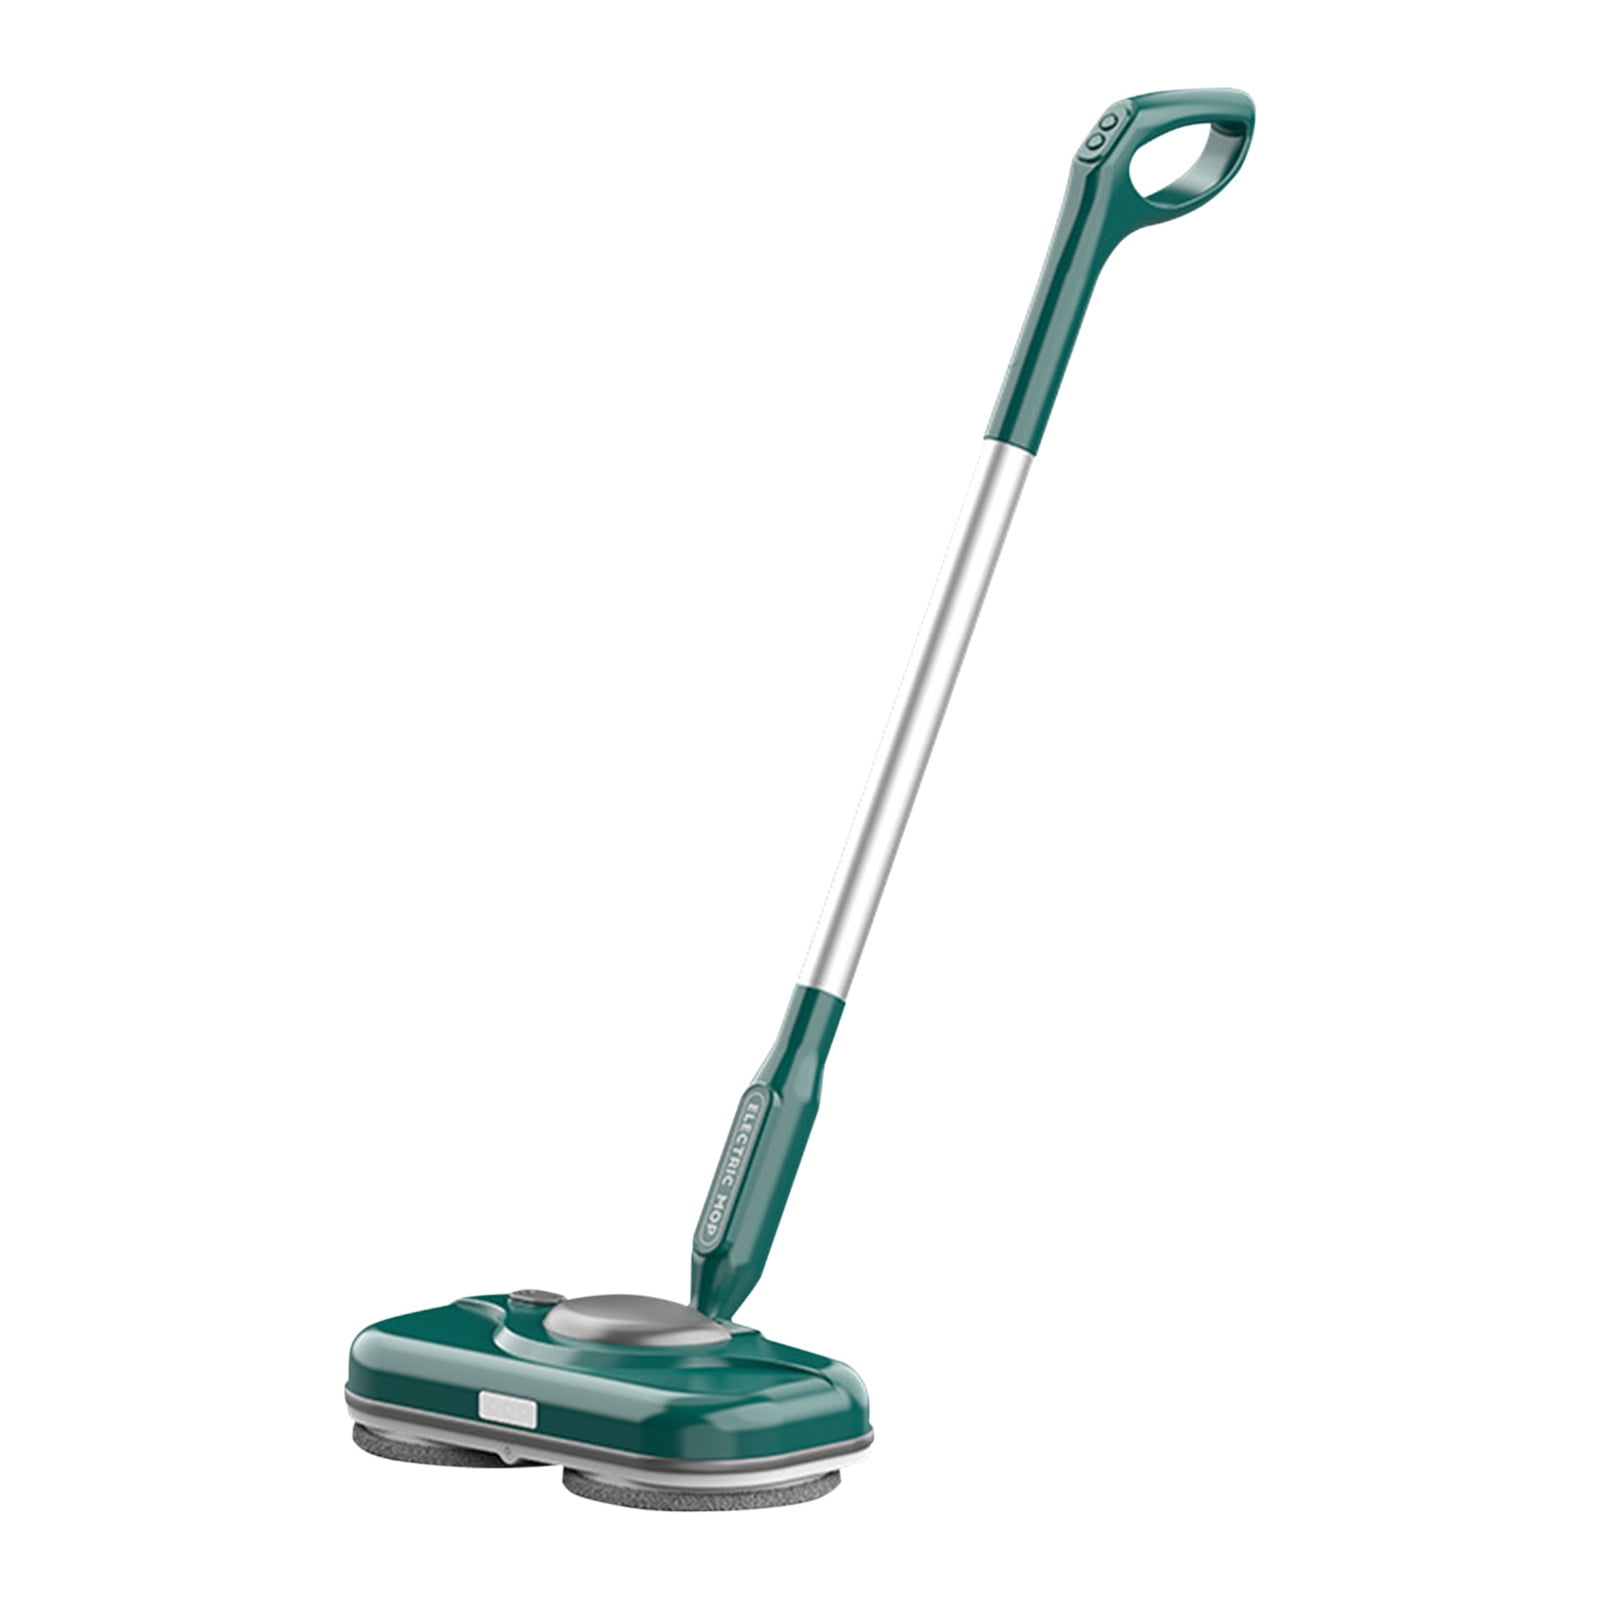 VBVC Cordless Electric Mop,Electric Spin Mop,Powerful Floor  Cleaner,Polisher For Hardwood,Tile Floors,Quiet Cleaning &  Waxing,Extendable Mop